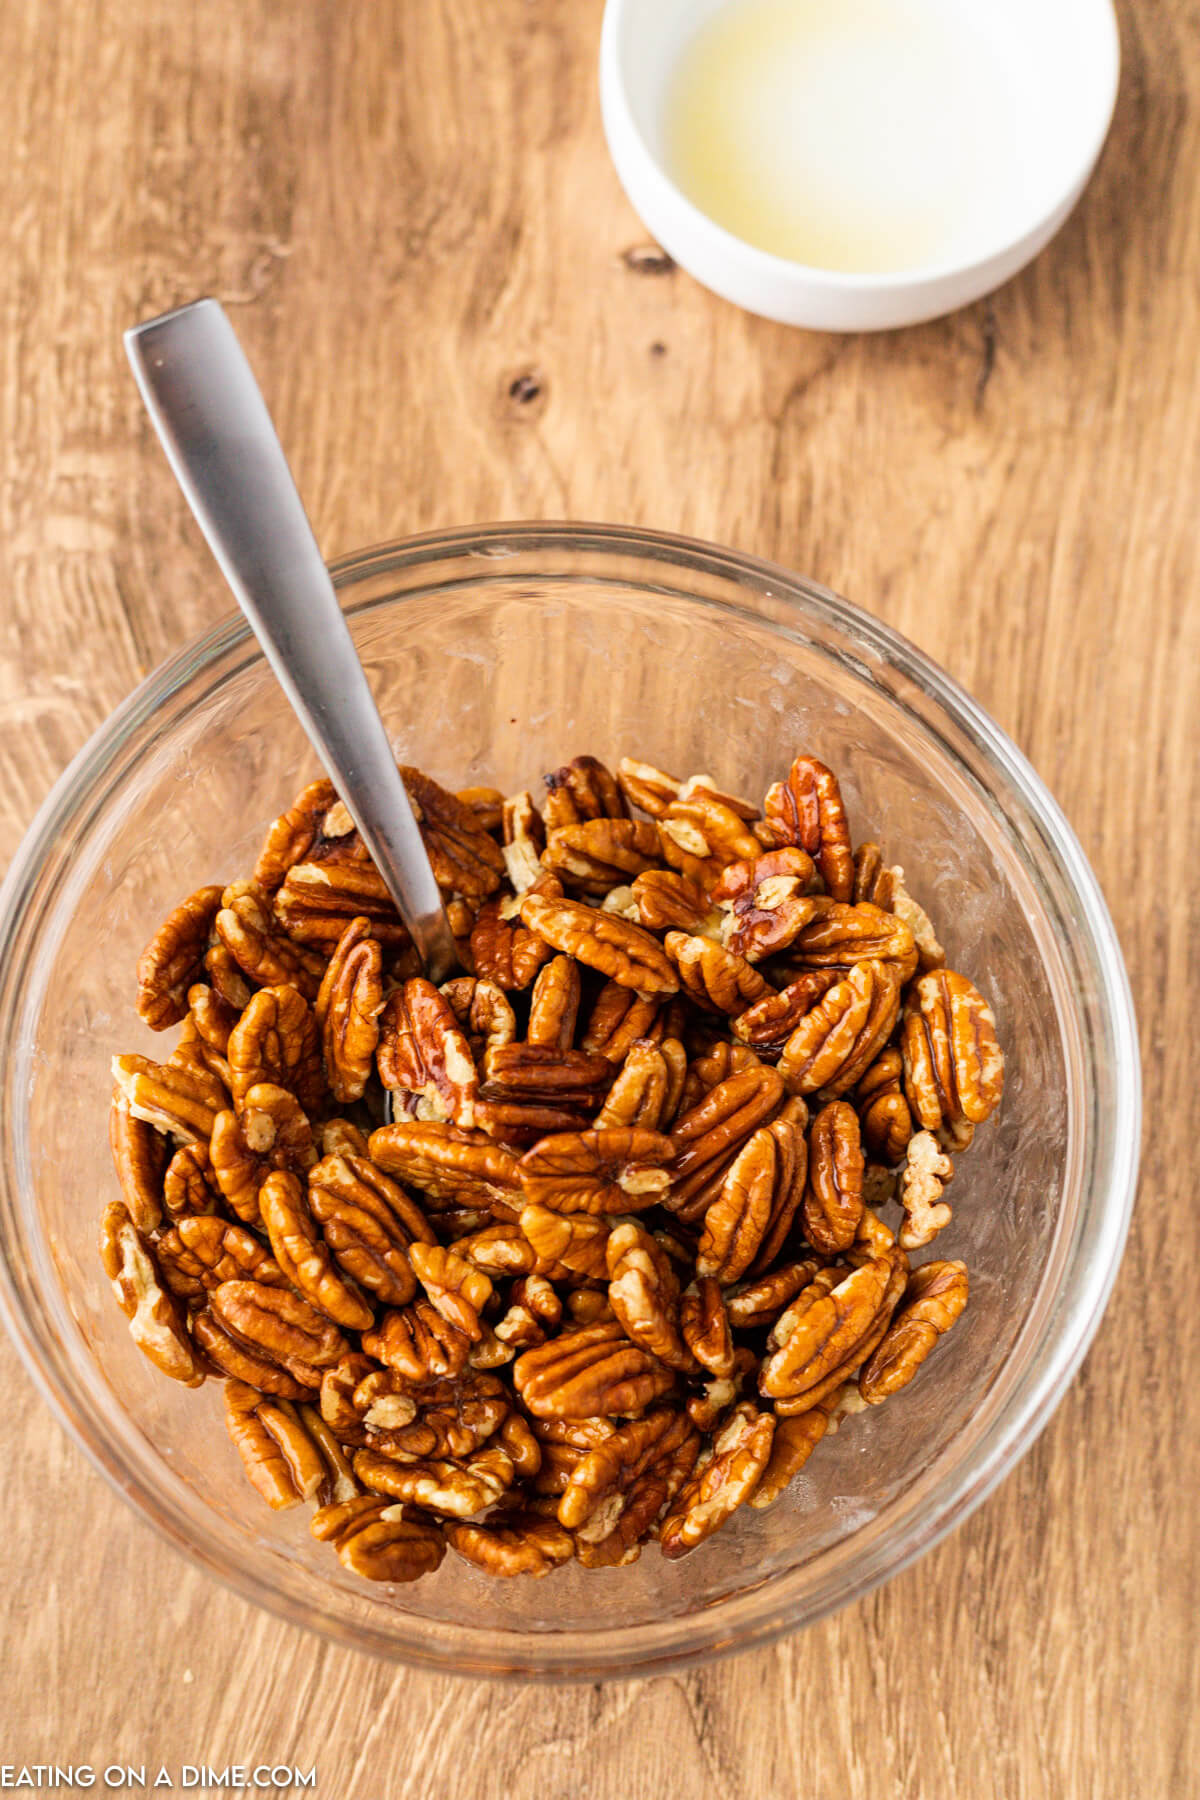 placing pecans in a bowl